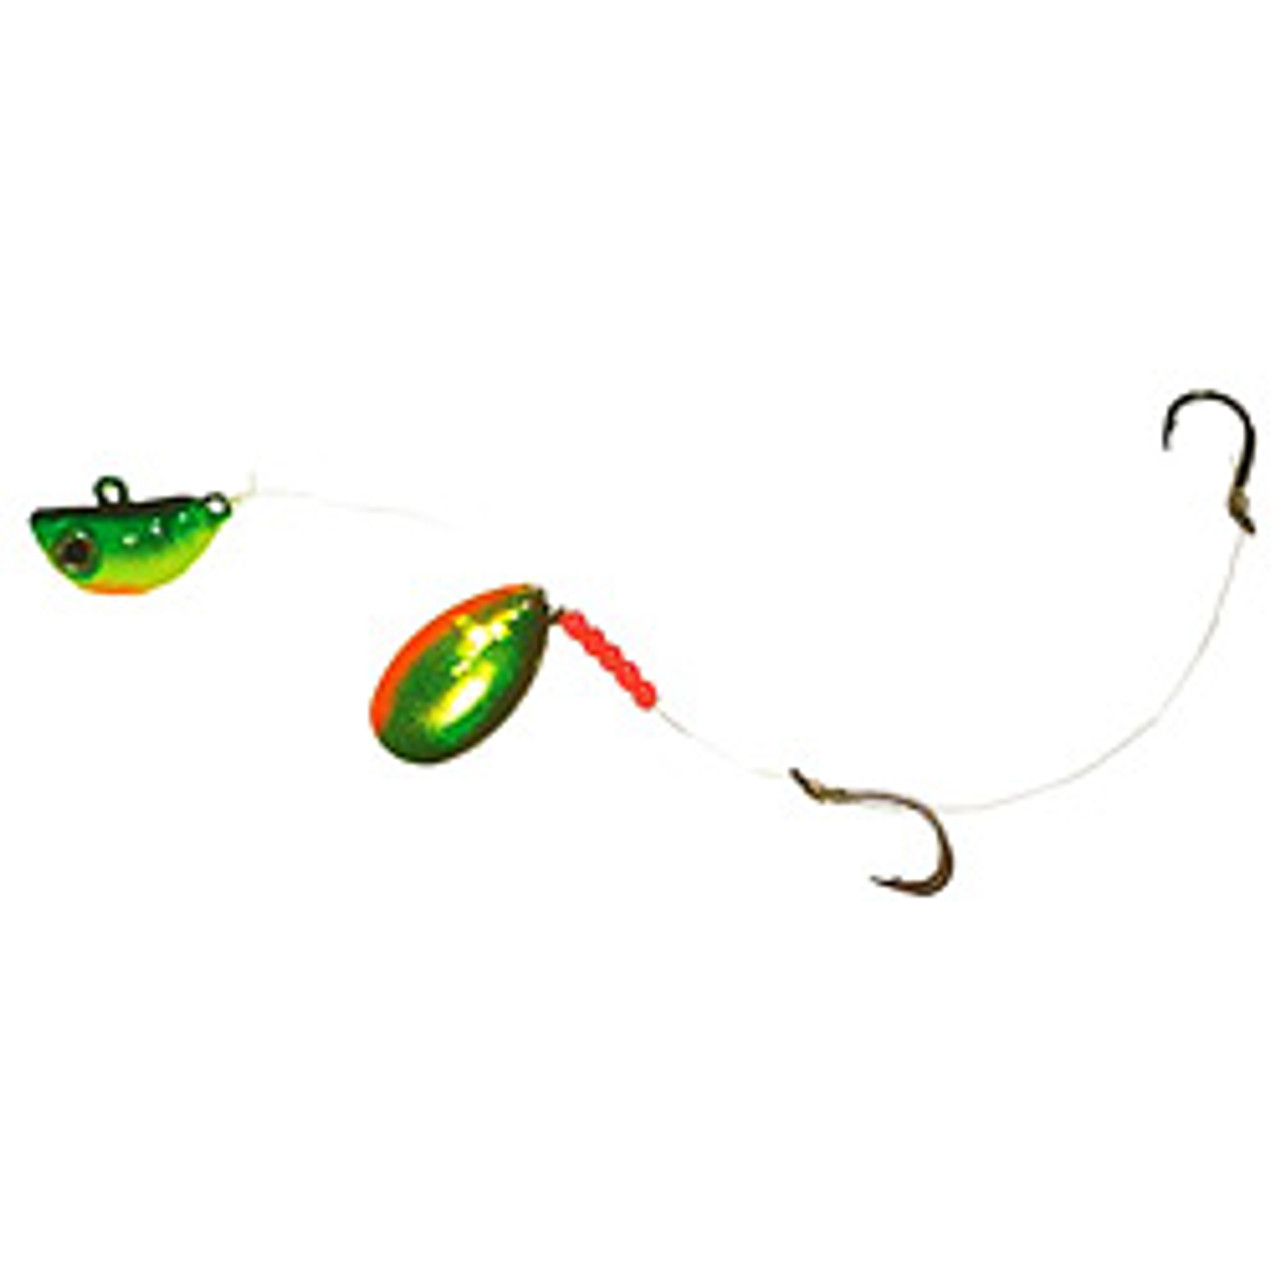 Jig'n Crawler Harness 1/4 oz by Mission Tackle